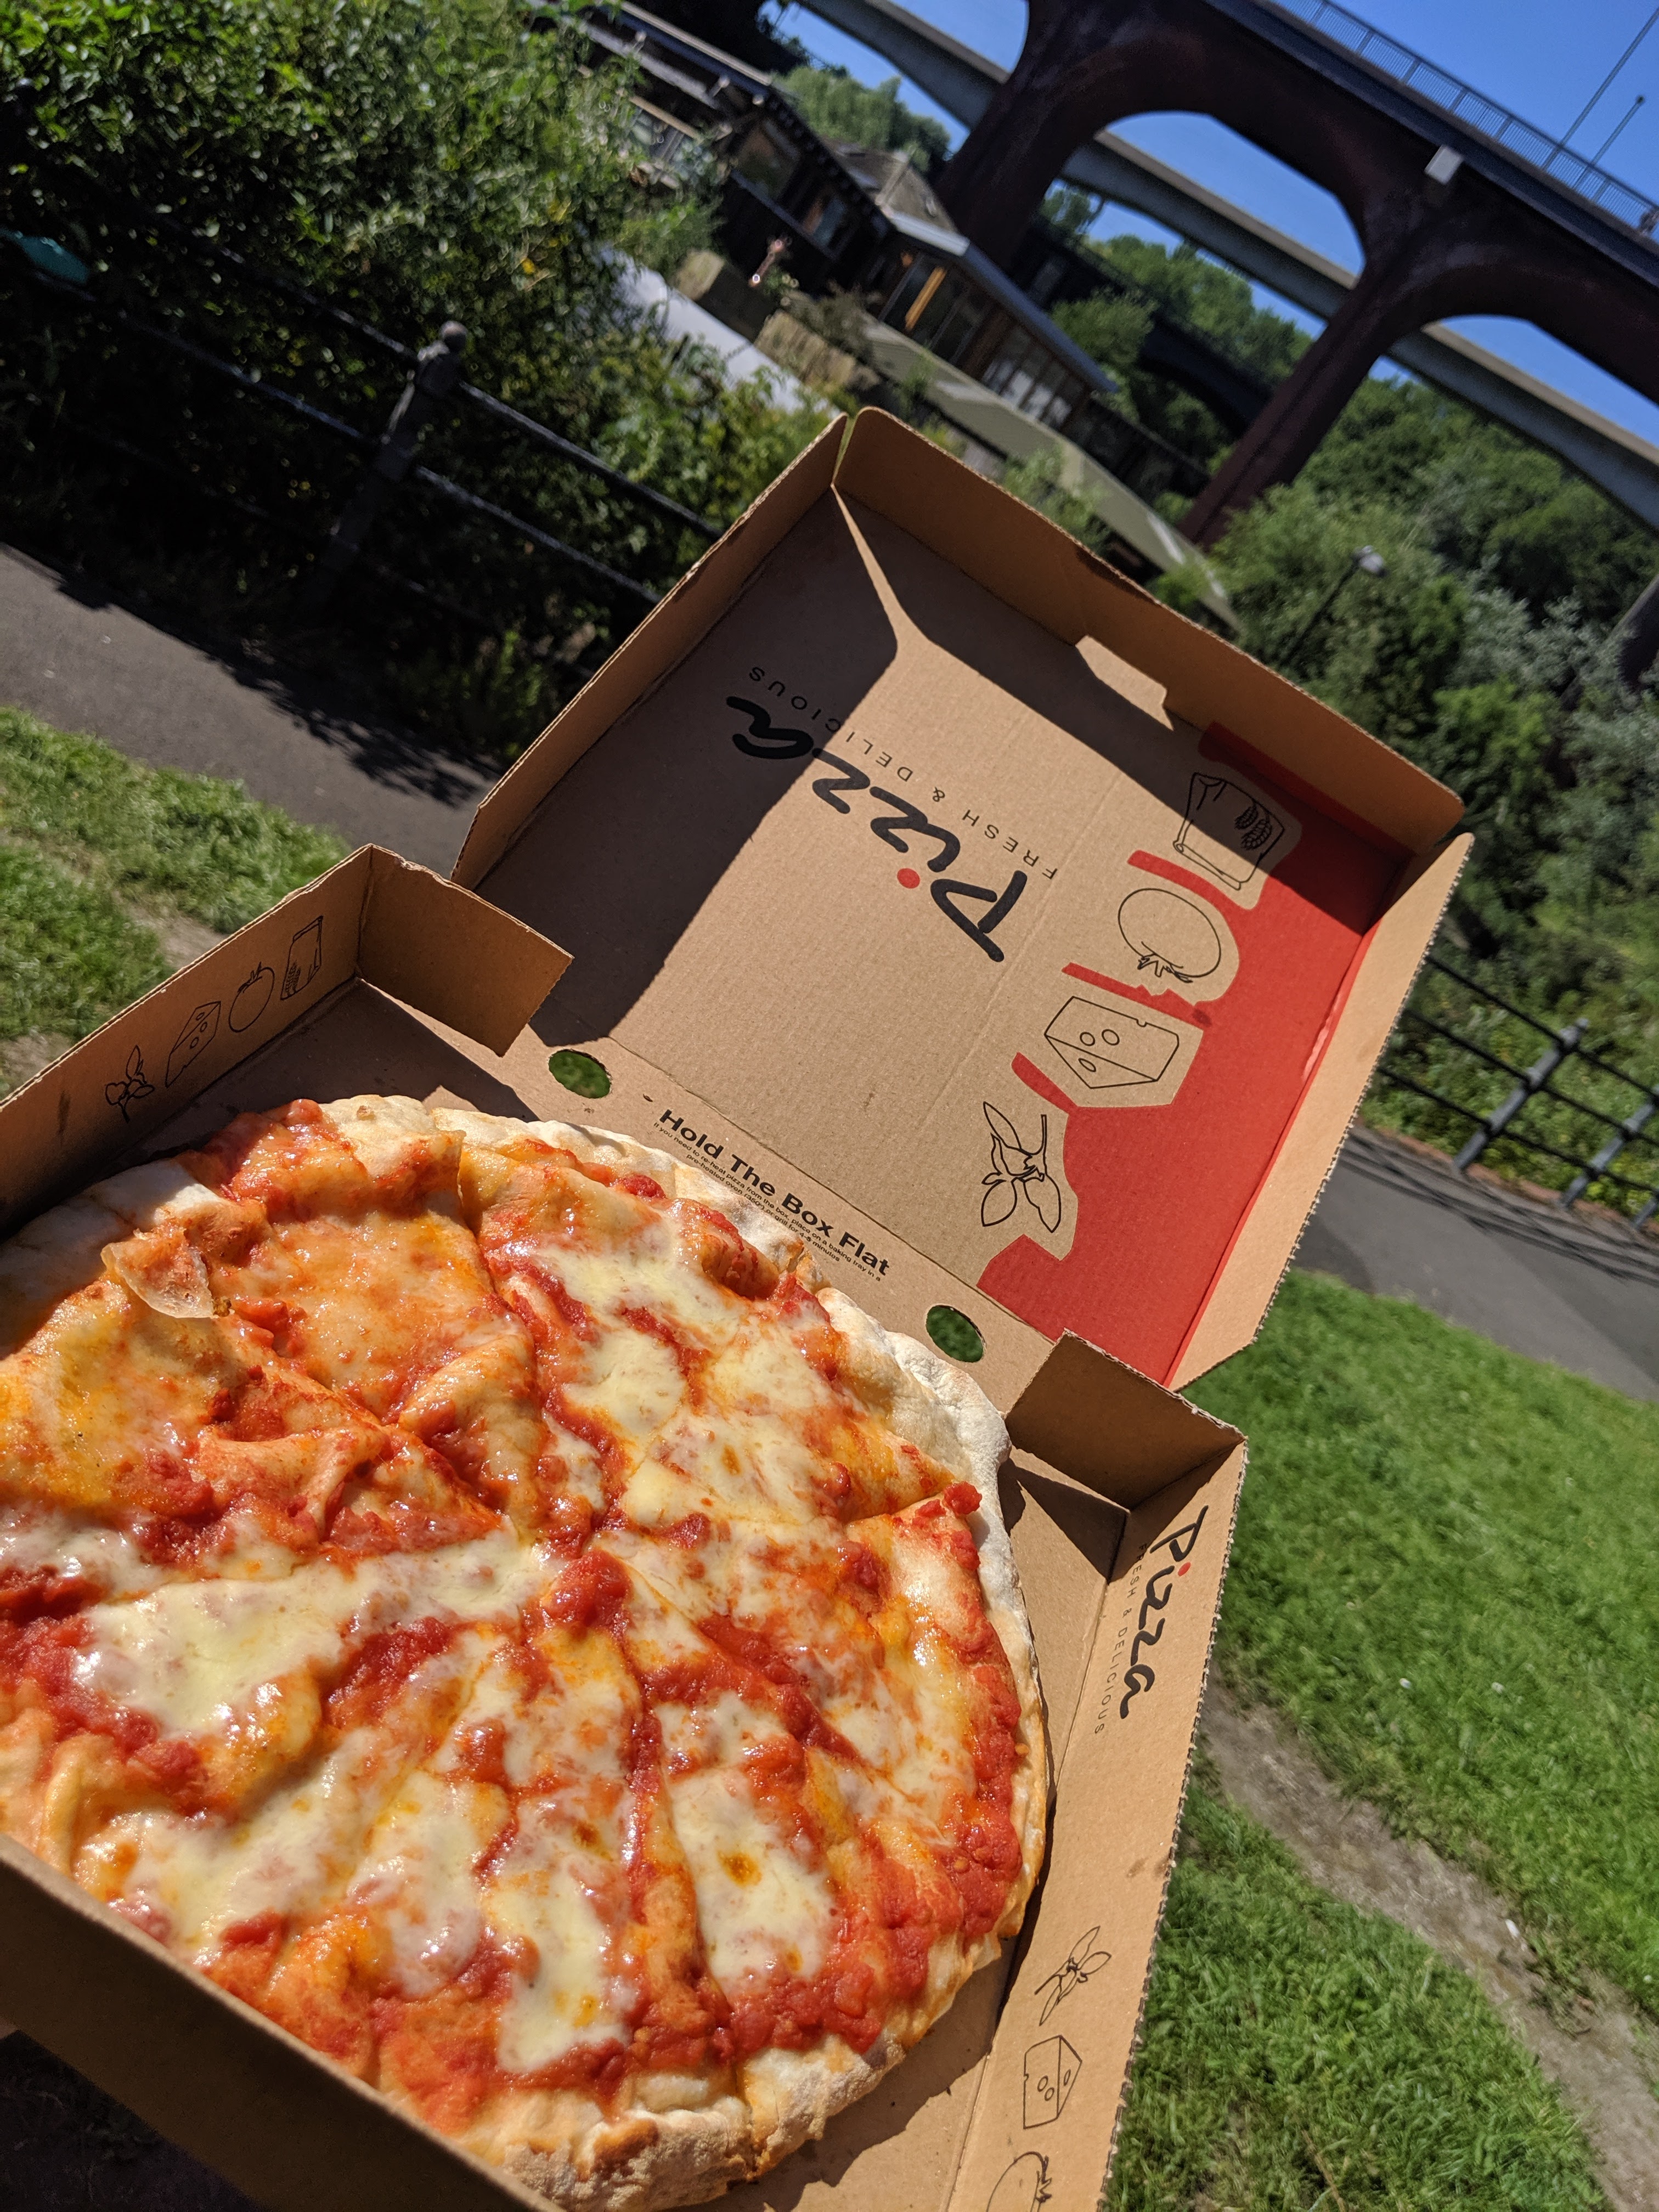 Ouseburn pizza from Di Meos